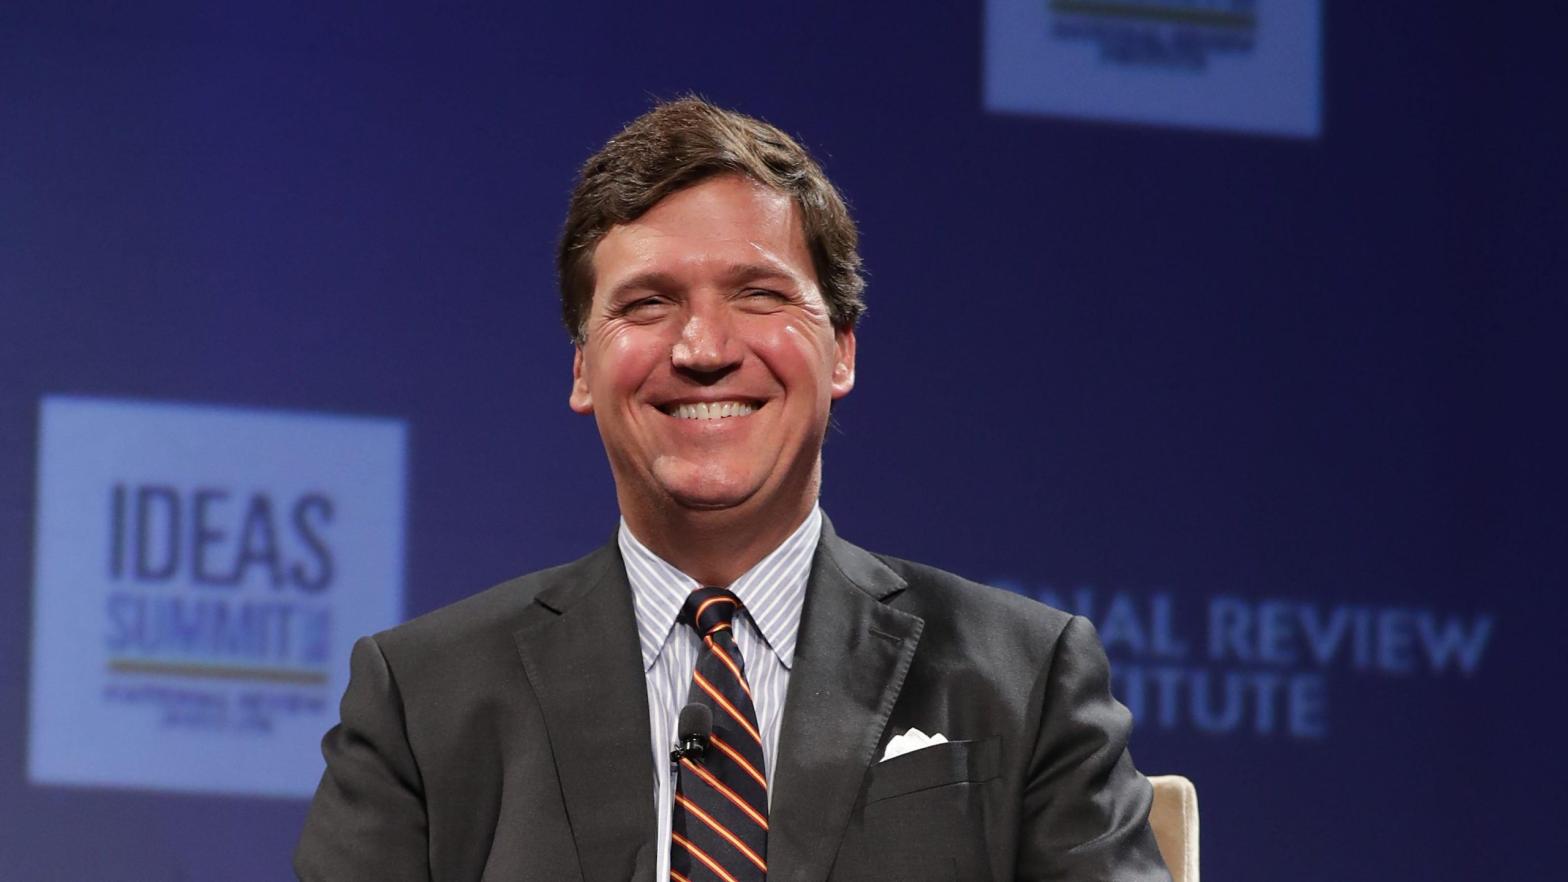 Fox News host Tucker Carlson discusses 'Populism and the Right' during the National Review Institute's Ideas Summit at the Mandarin Oriental Hotel March 29, 2019 in Washington, DC. (Photo: Chip Somodevilla, Getty Images)